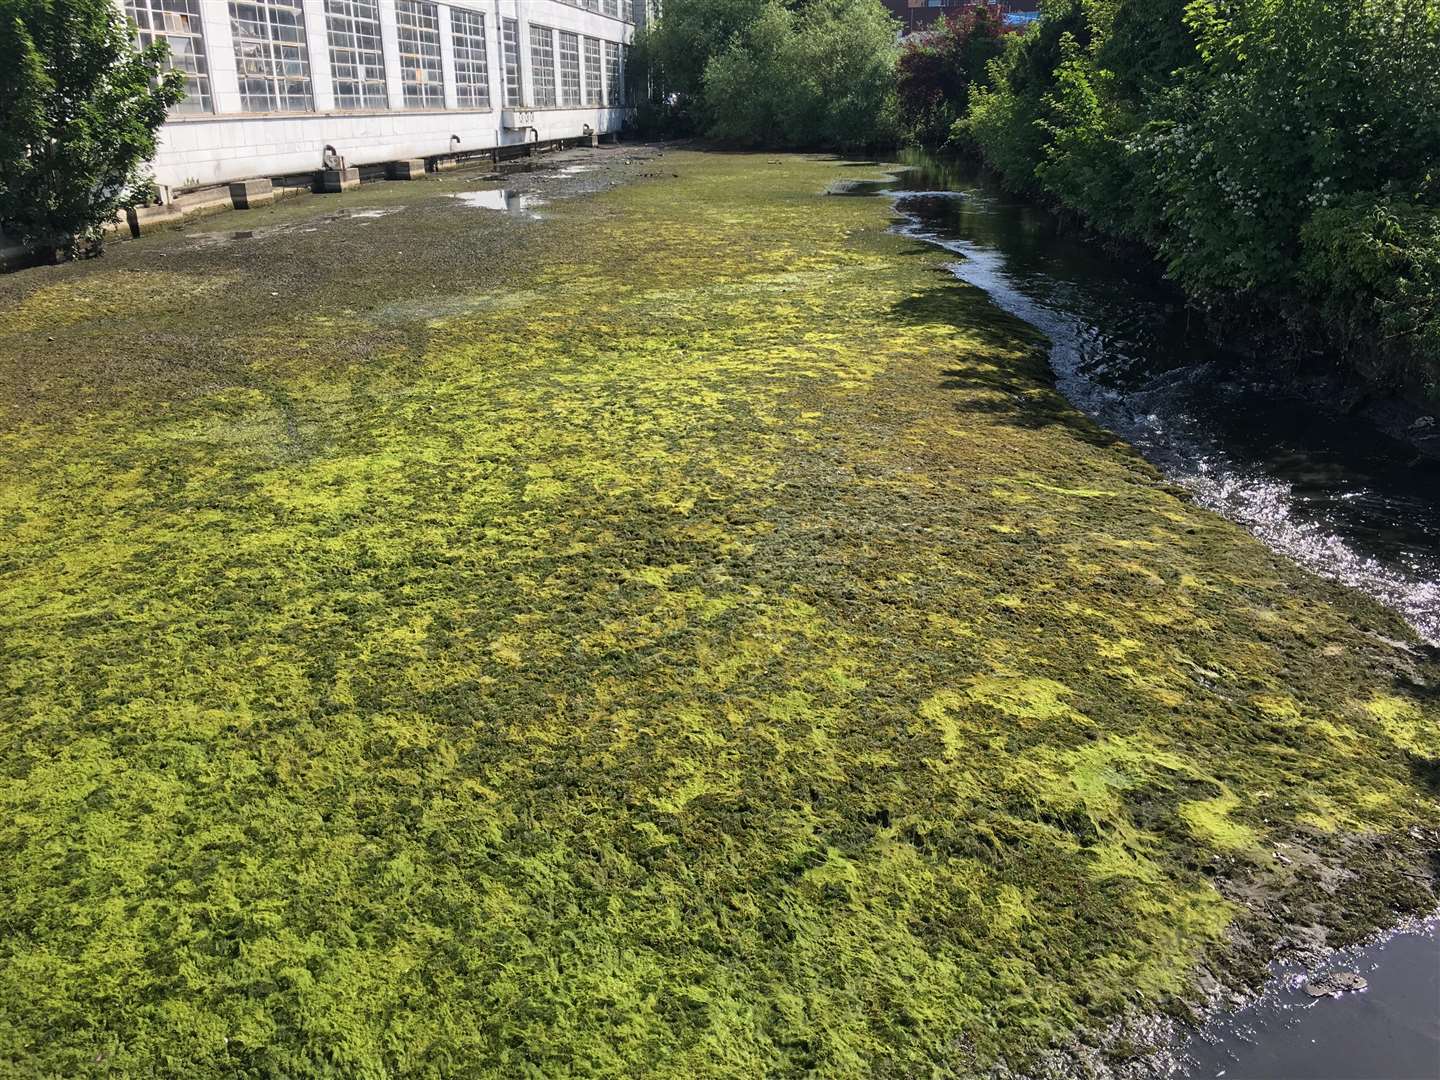 The River Len has been coated in a green layer of what is thought to be algae (2573216)